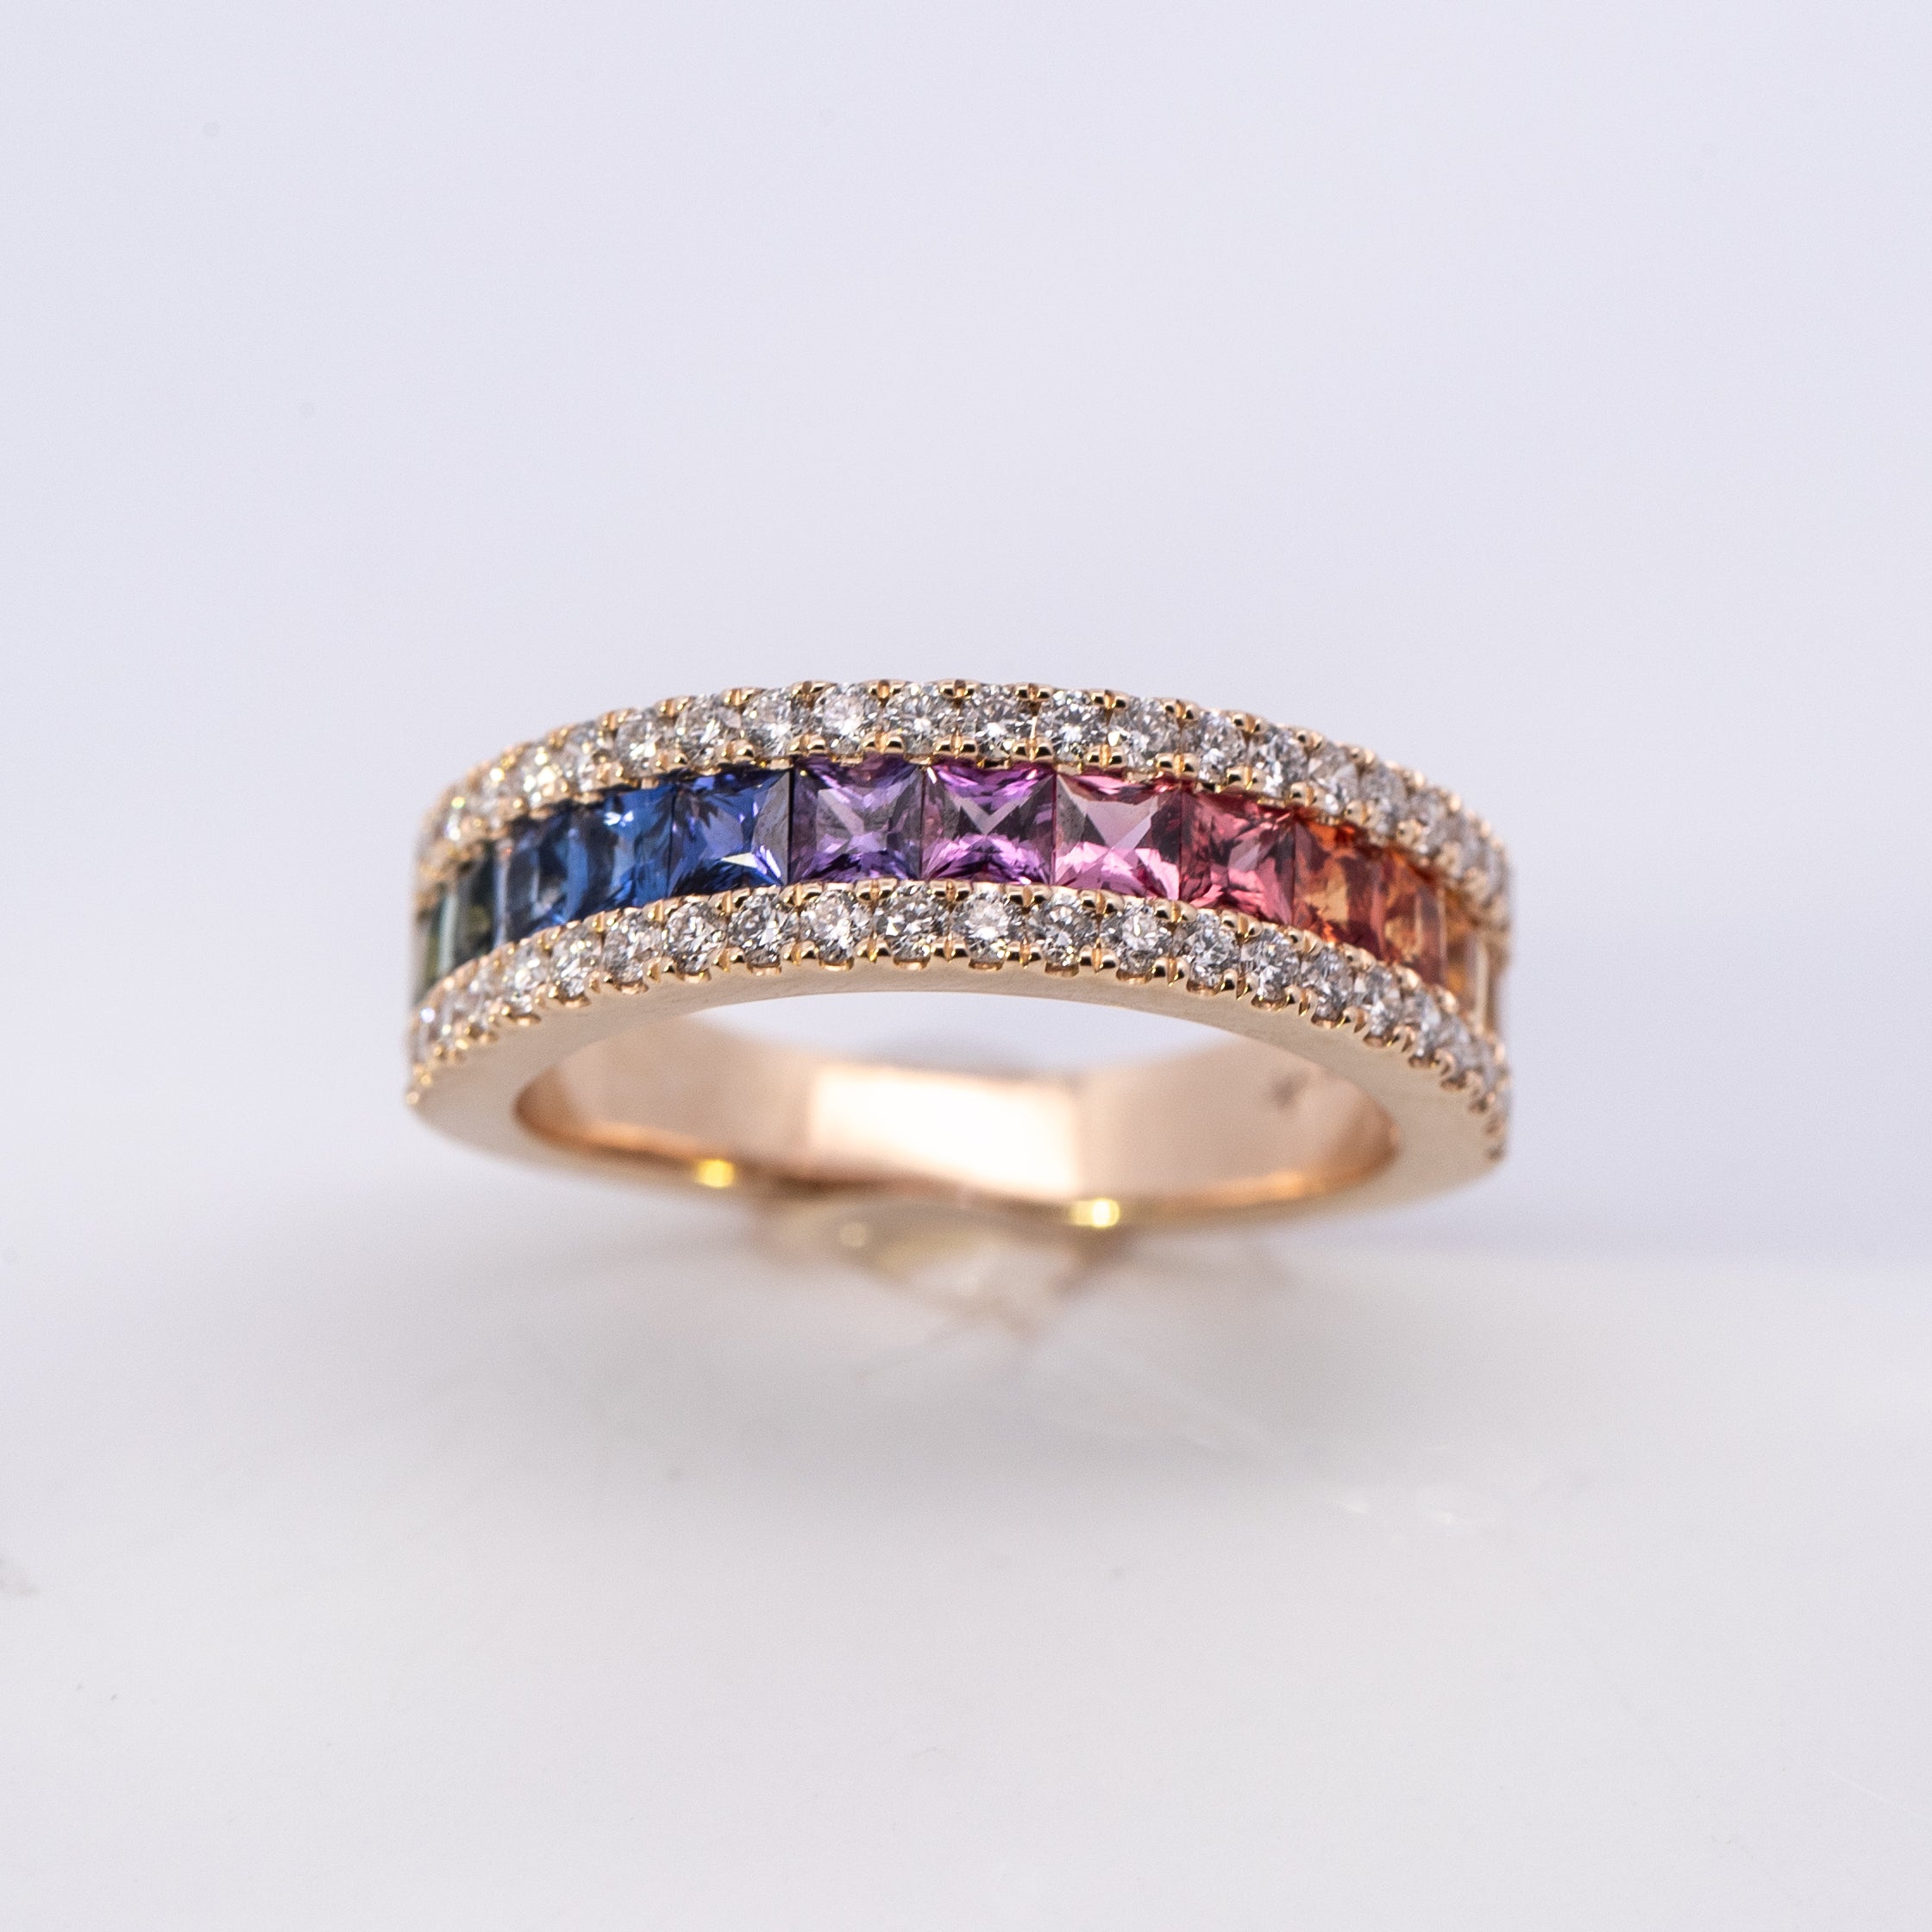 Stackable Diamonds Ring - Colored Stone Rings - Womens